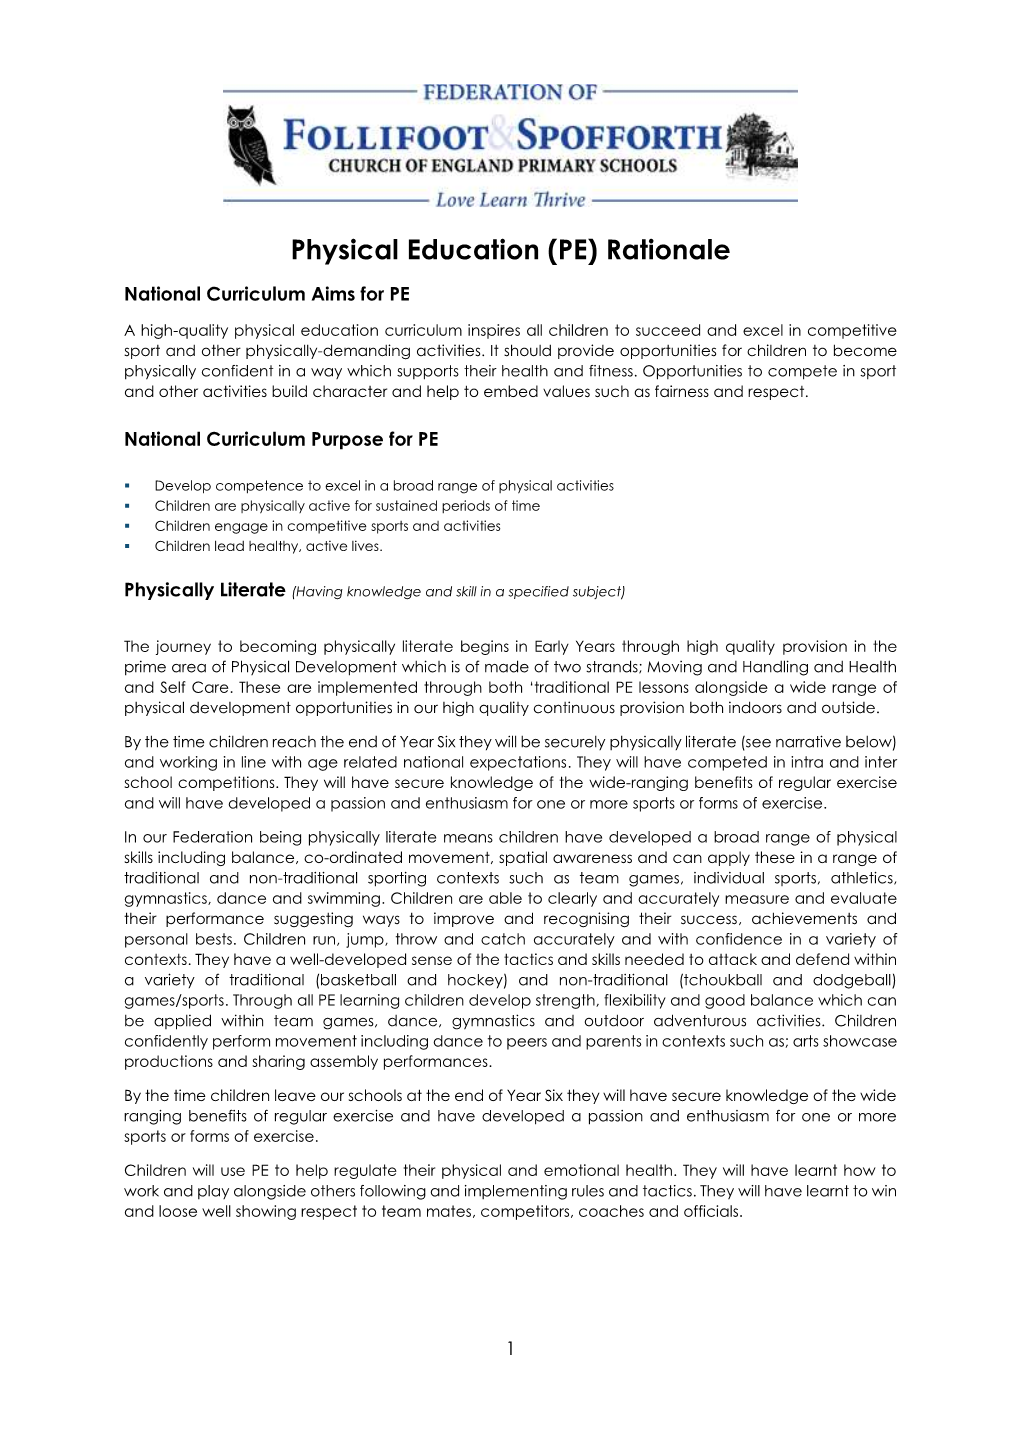 Physical Education (PE) Rationale